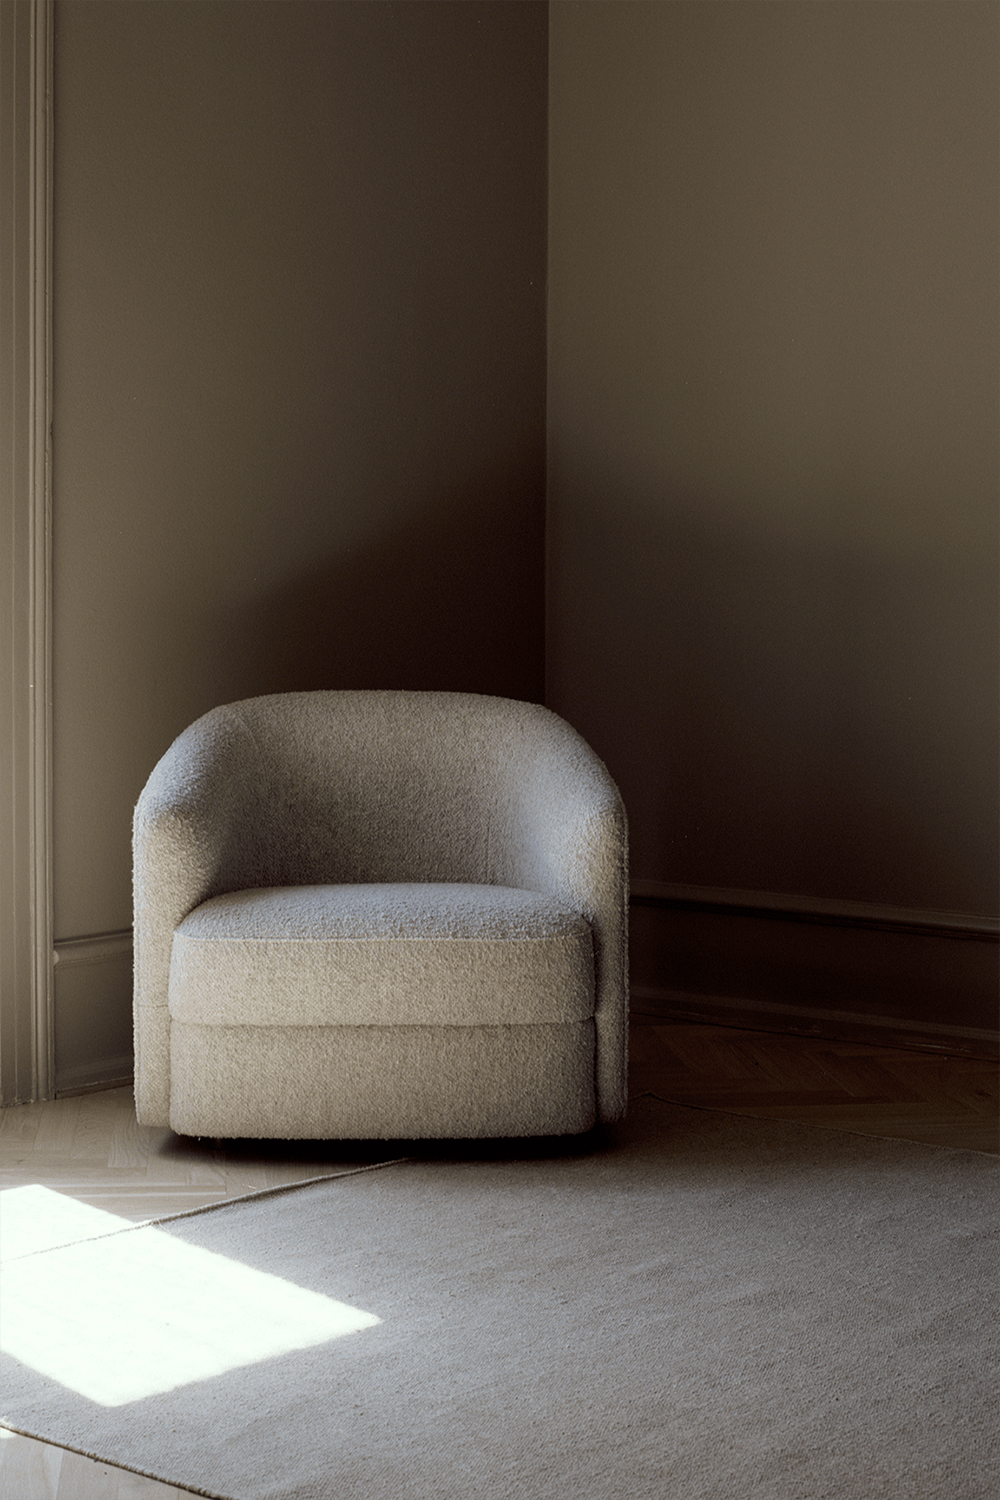 Covent Lounge Chair by New Works.